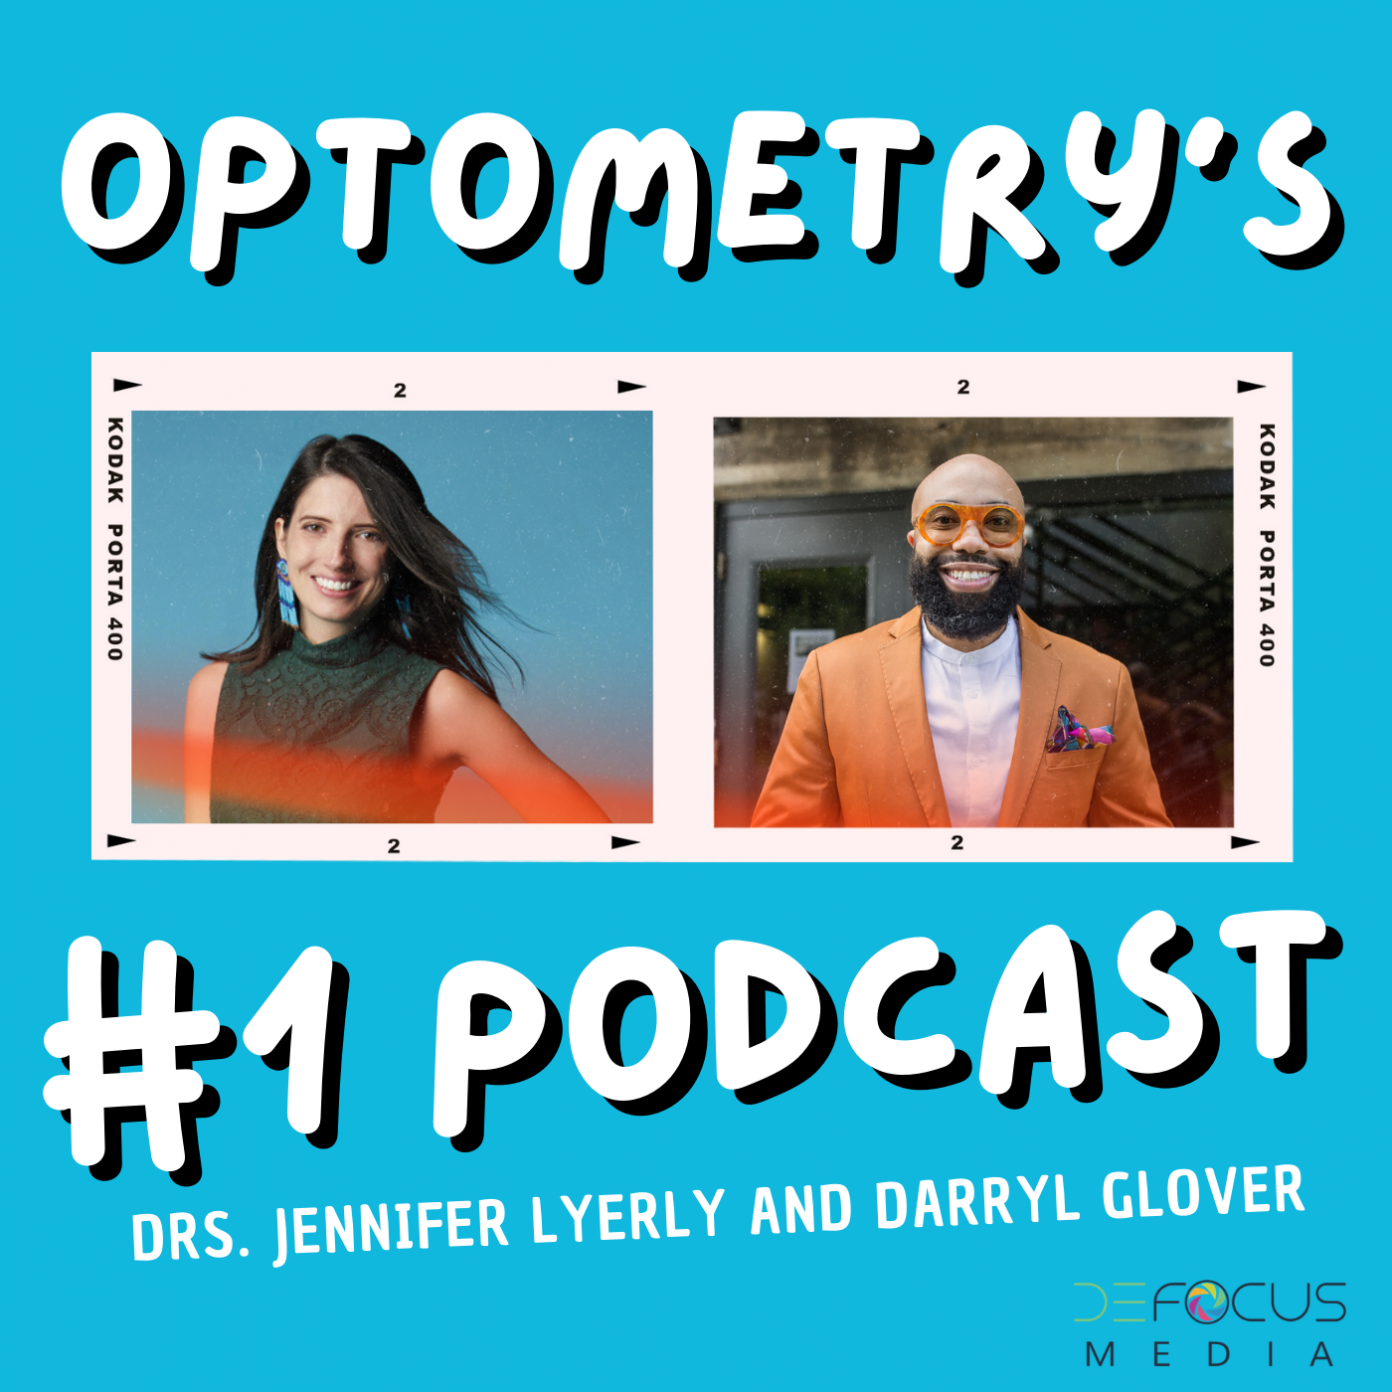 A highlight from Optometry Podcast: Dr. Neena James on Dry Eye and Working with Industry